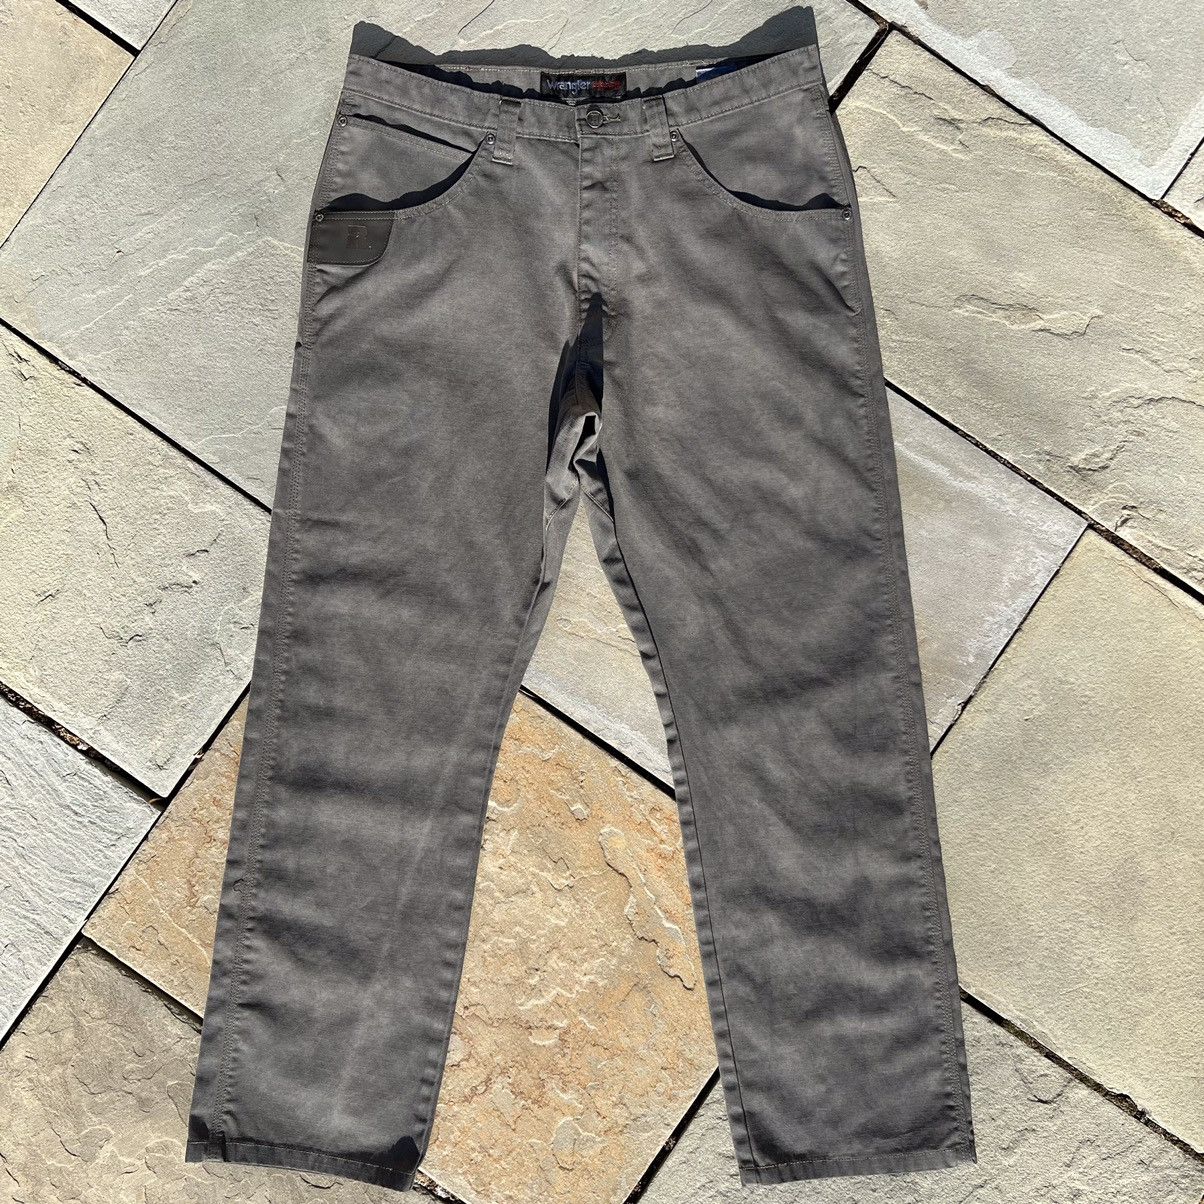 Custom Upcycled Reworked Ripstop Utility Work Pants Size US 36 / EU 52 - 1 Preview